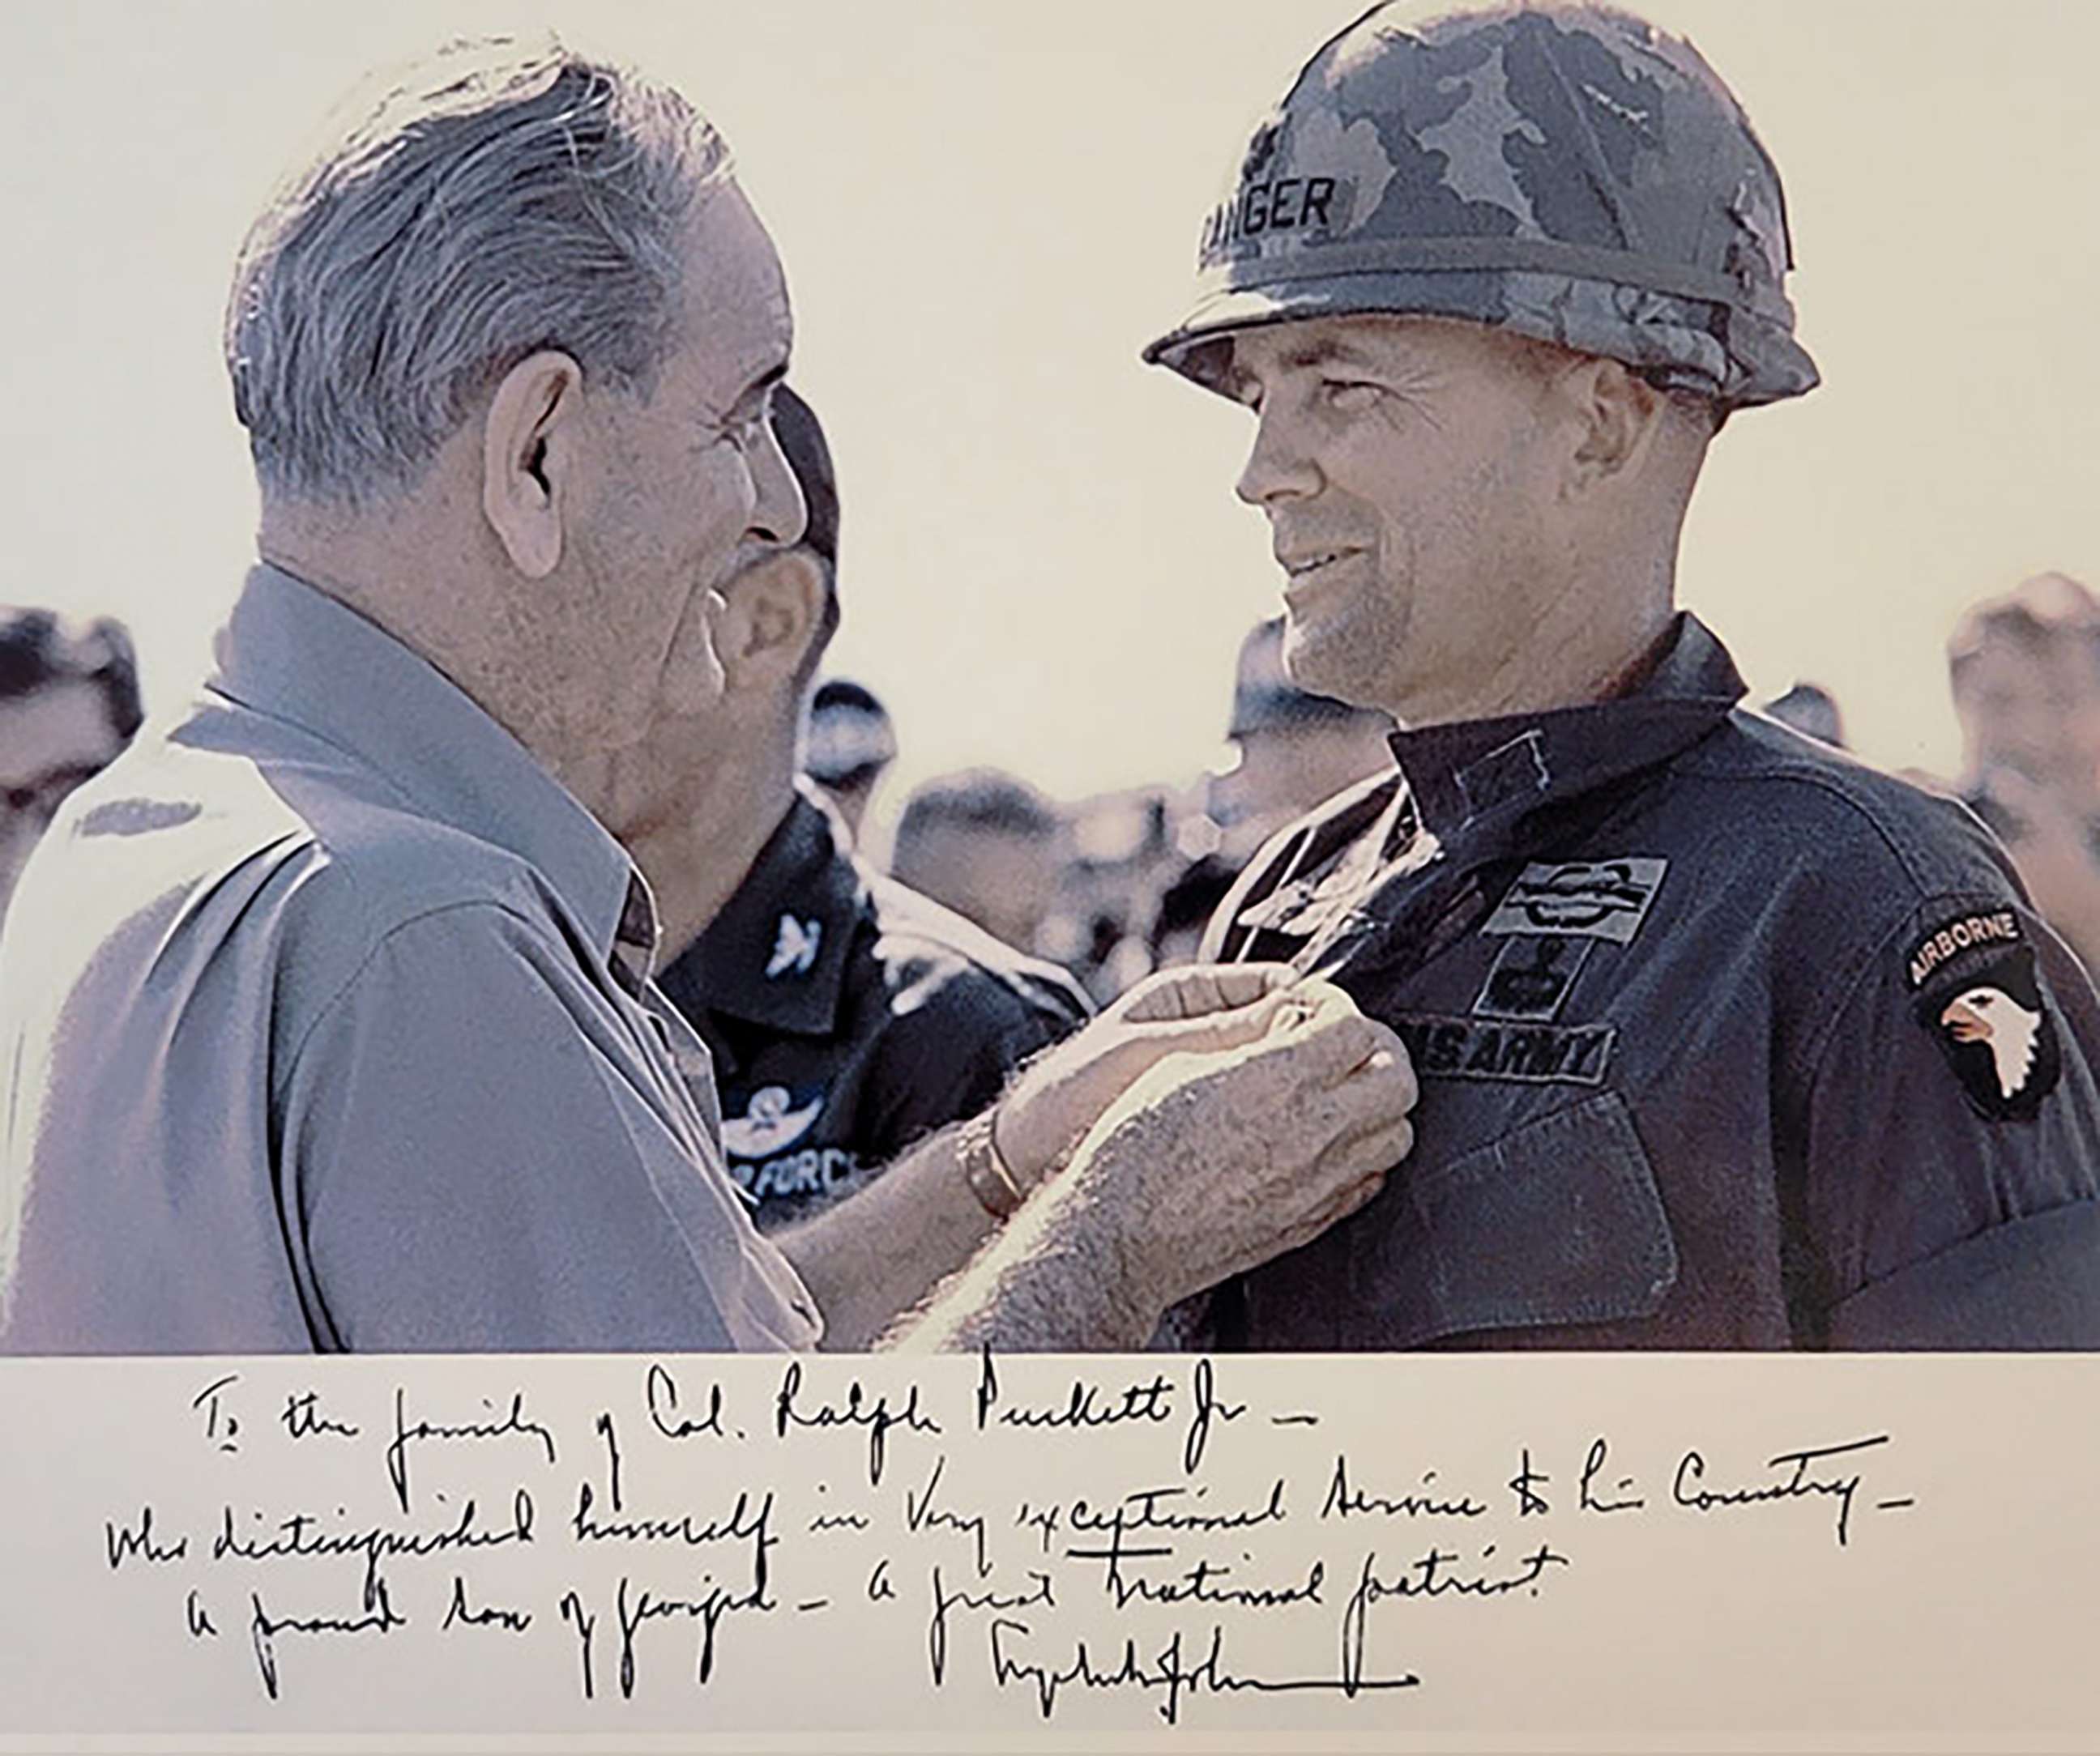 PHOTO: Col. Puckett receiving his second Distinguished Service Cross from President Lyndon B. Johnson “To the family of Col. Ralph Puckett Jr. – Who distinguished himself in very exceptional service to his country – a proud son of Georgia.